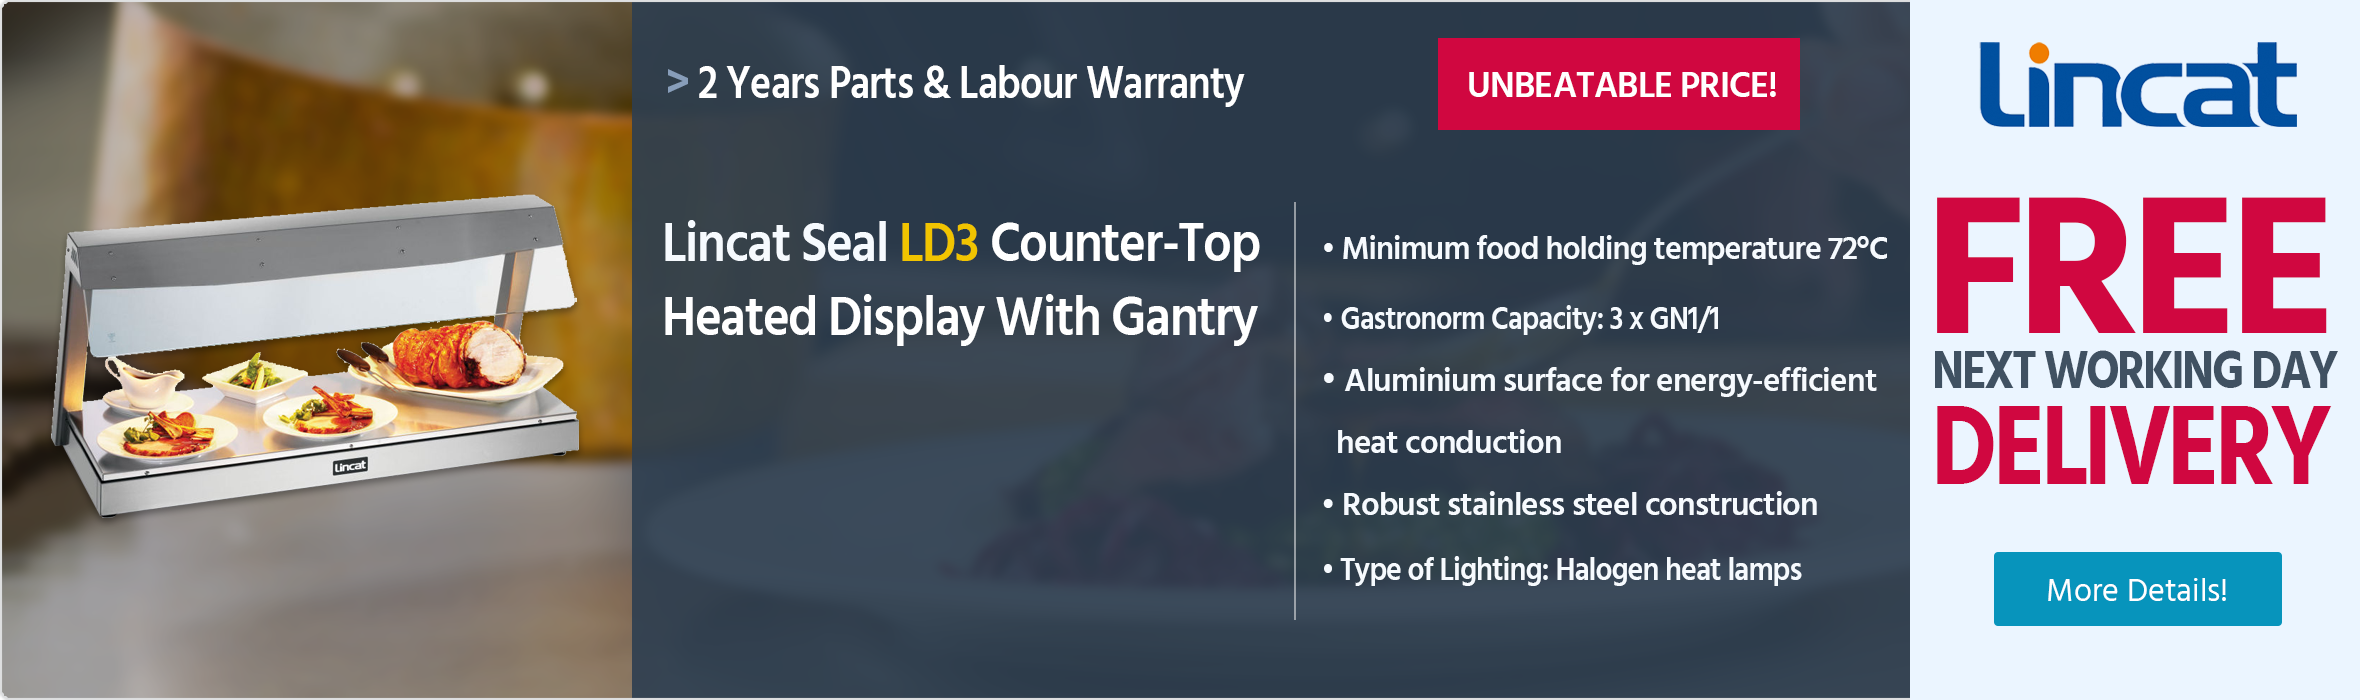 Lincat Seal LD3 Counter-Top Heated Display With Gantry (3 x 1/1 GN)